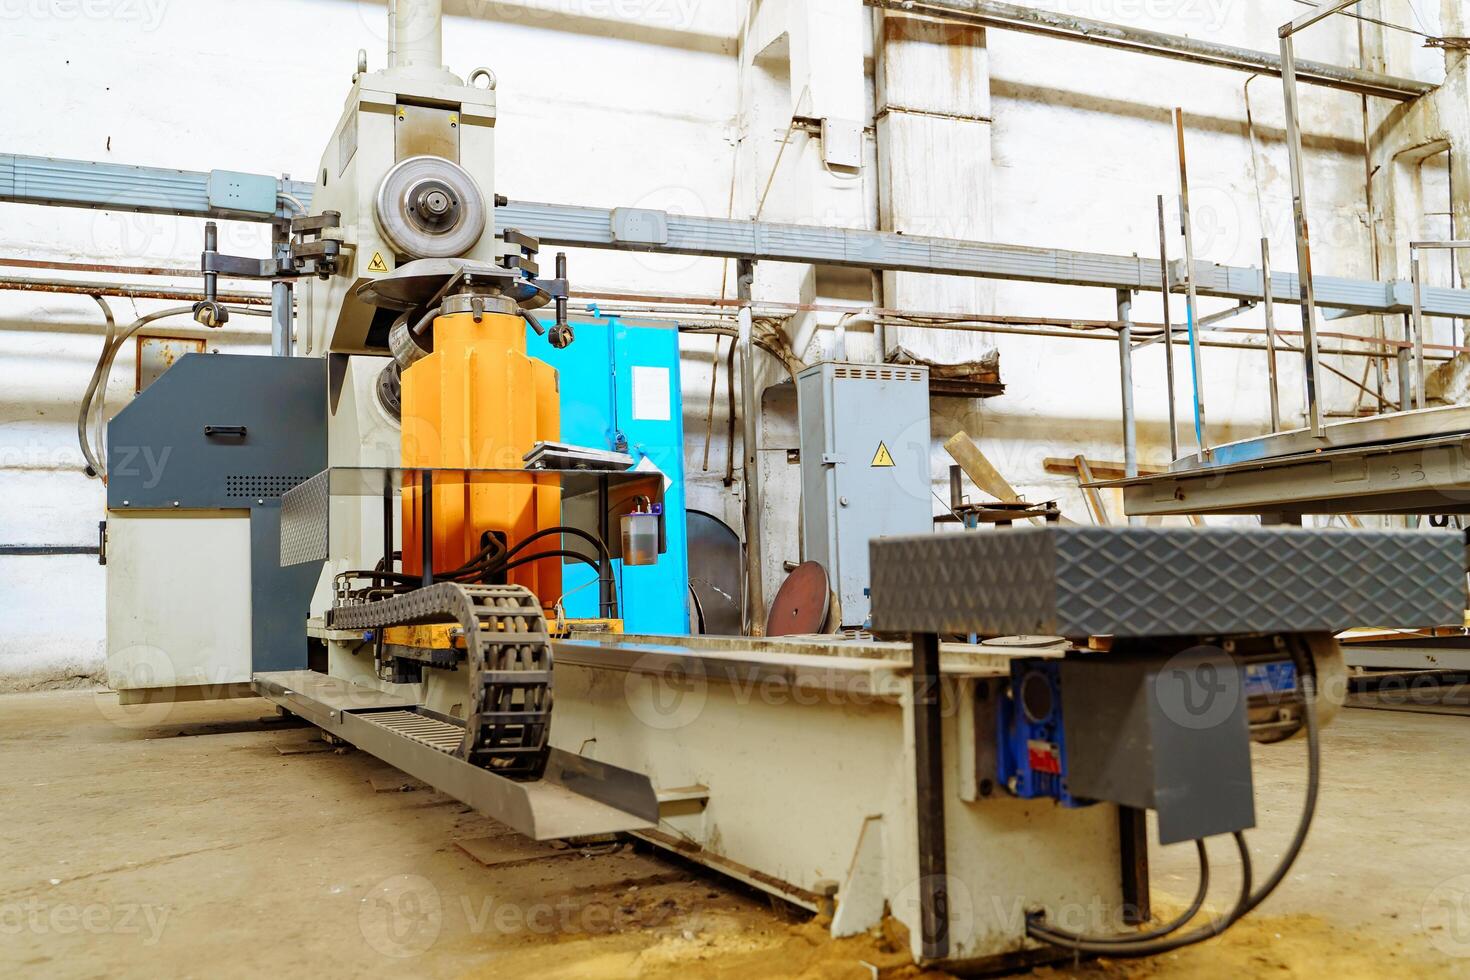 Drilling machine working process on metal factory photo